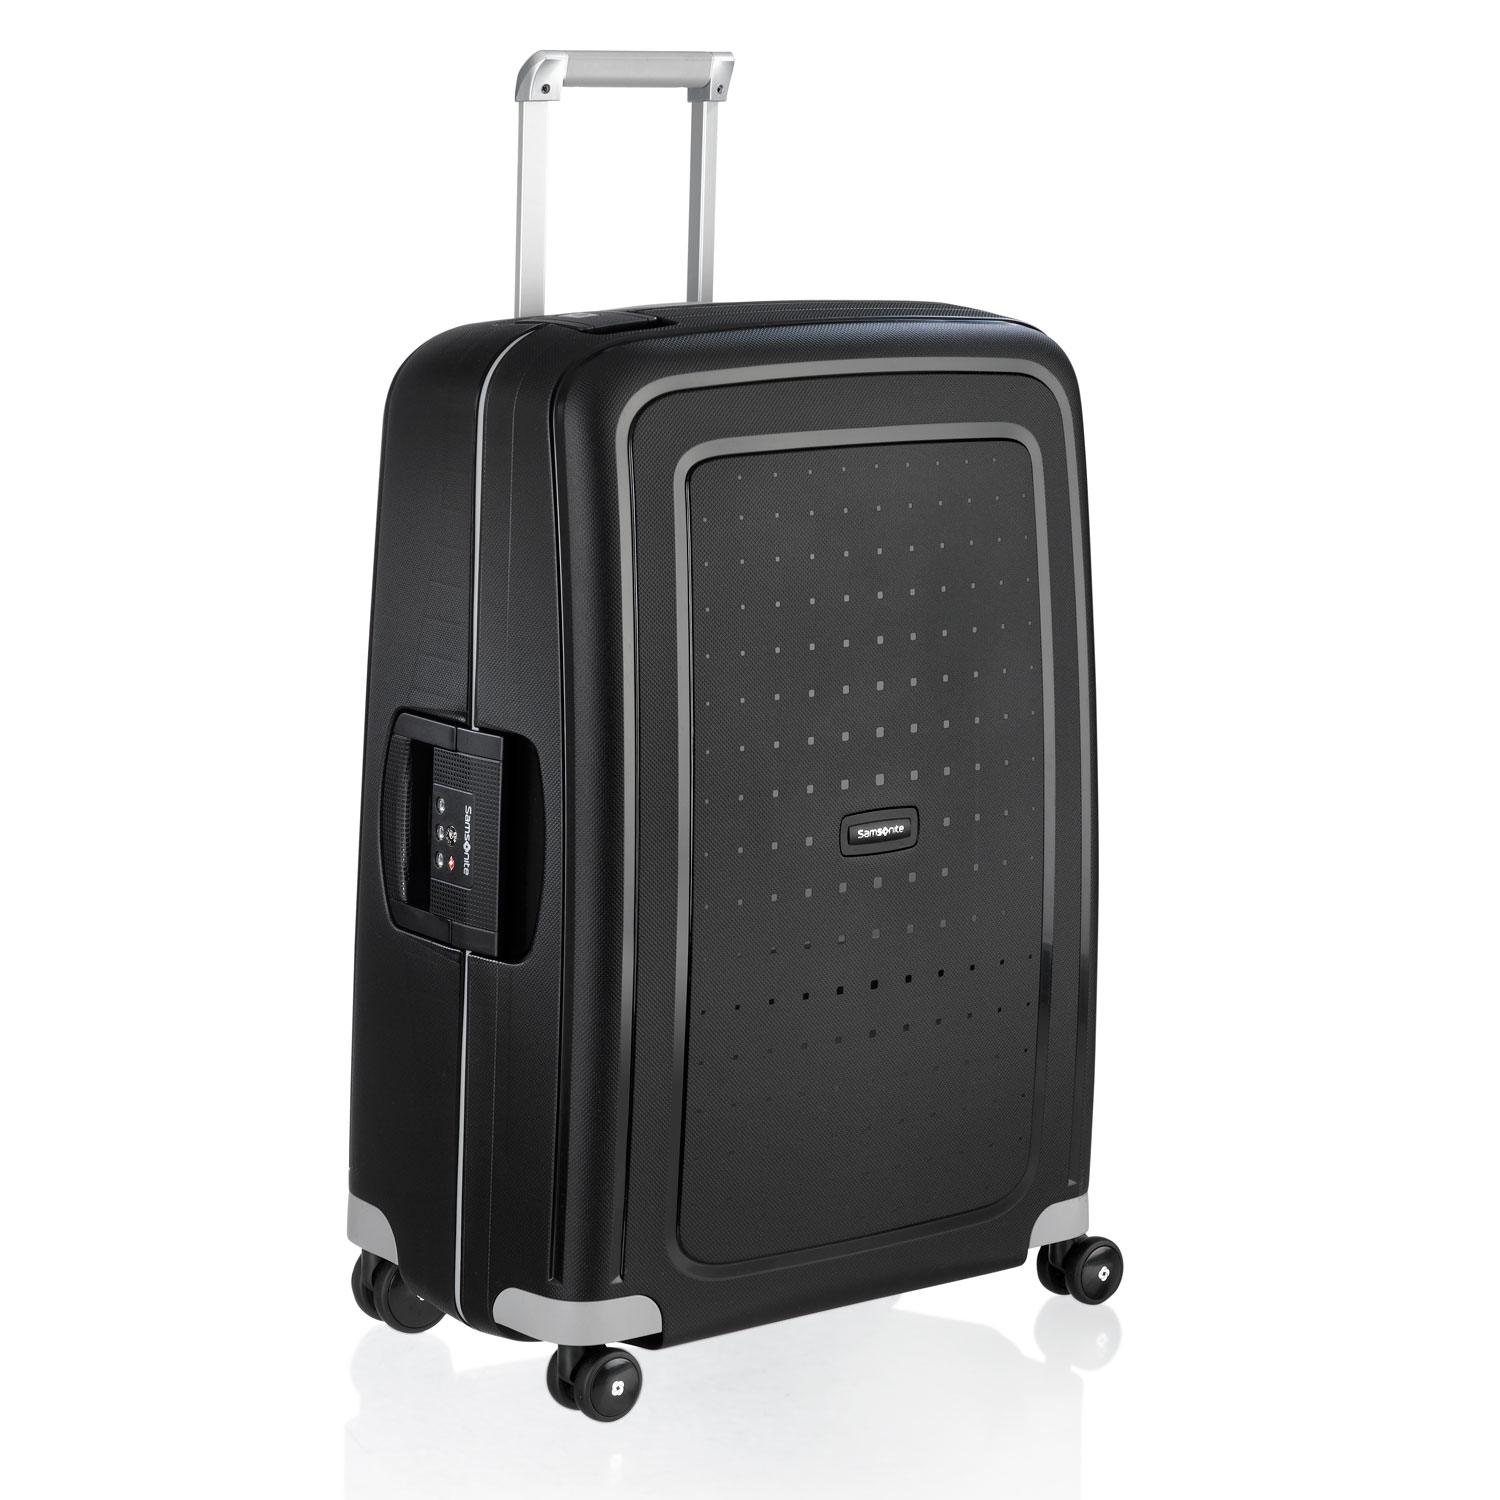 Samsonite S'Cure 28 Inch Spinner Suitcase Zipperless Hard Shell Luggage ...